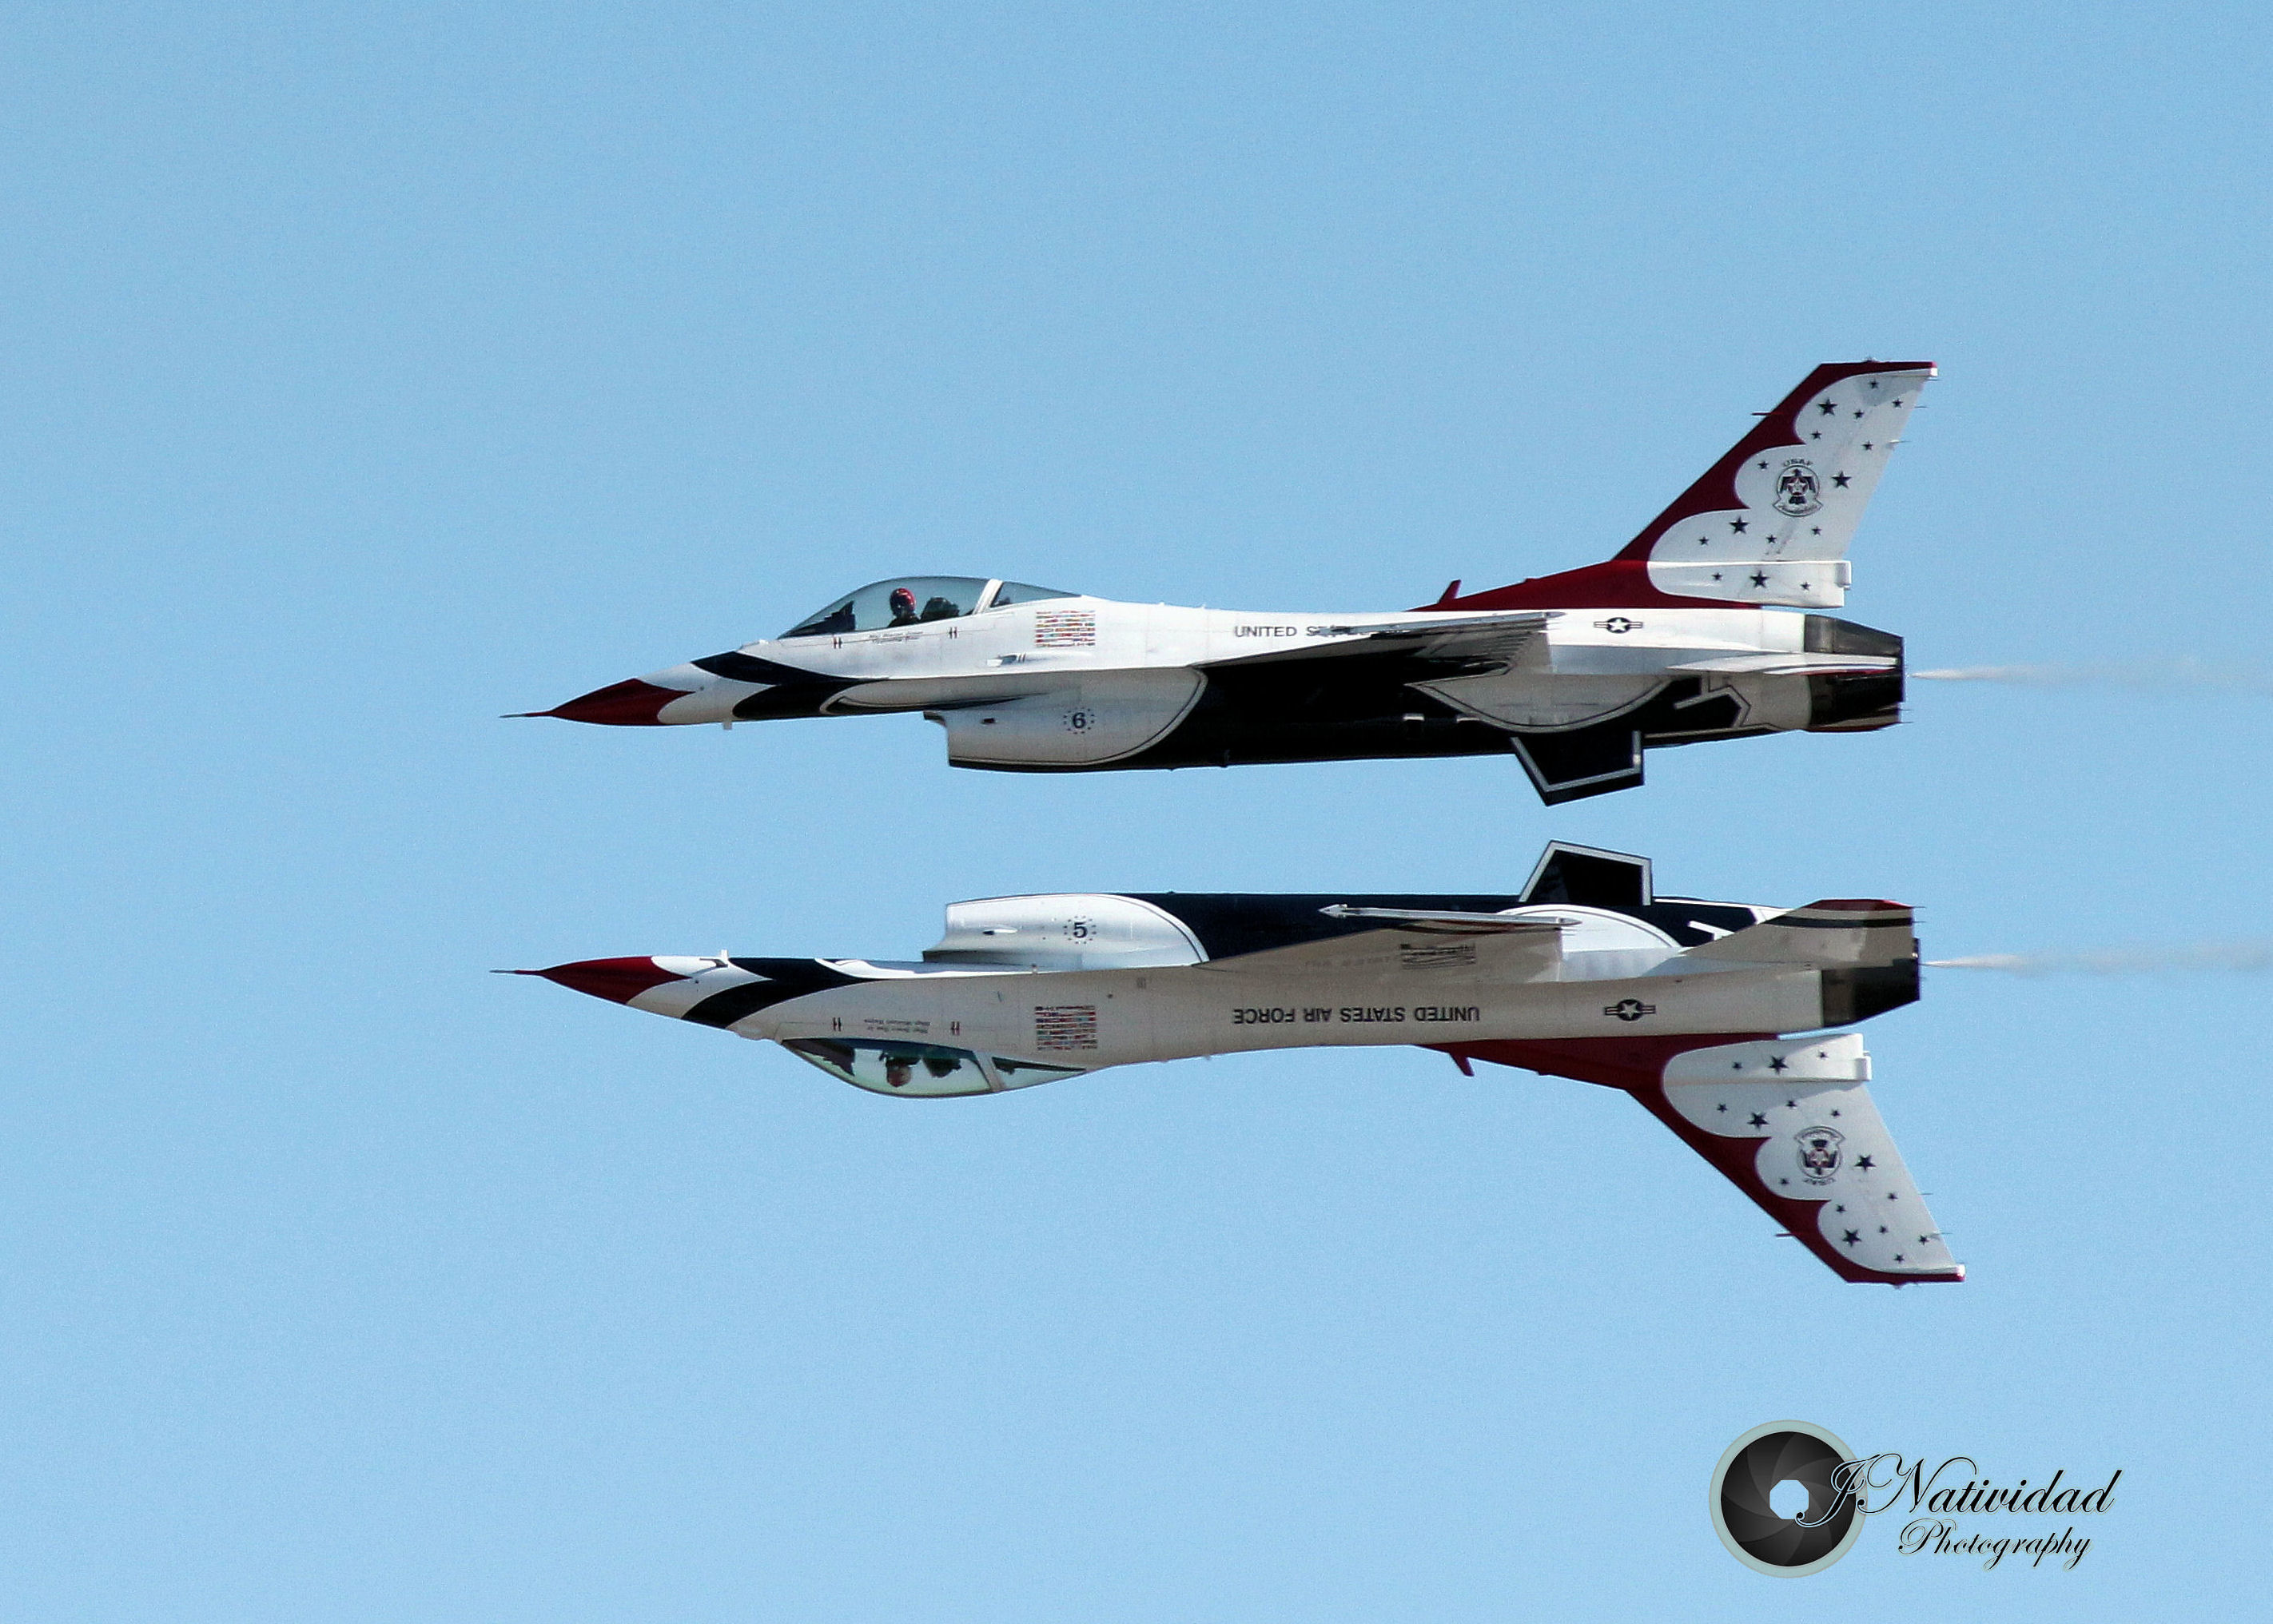 16 Thunderbirds Reflection by GhostComet on